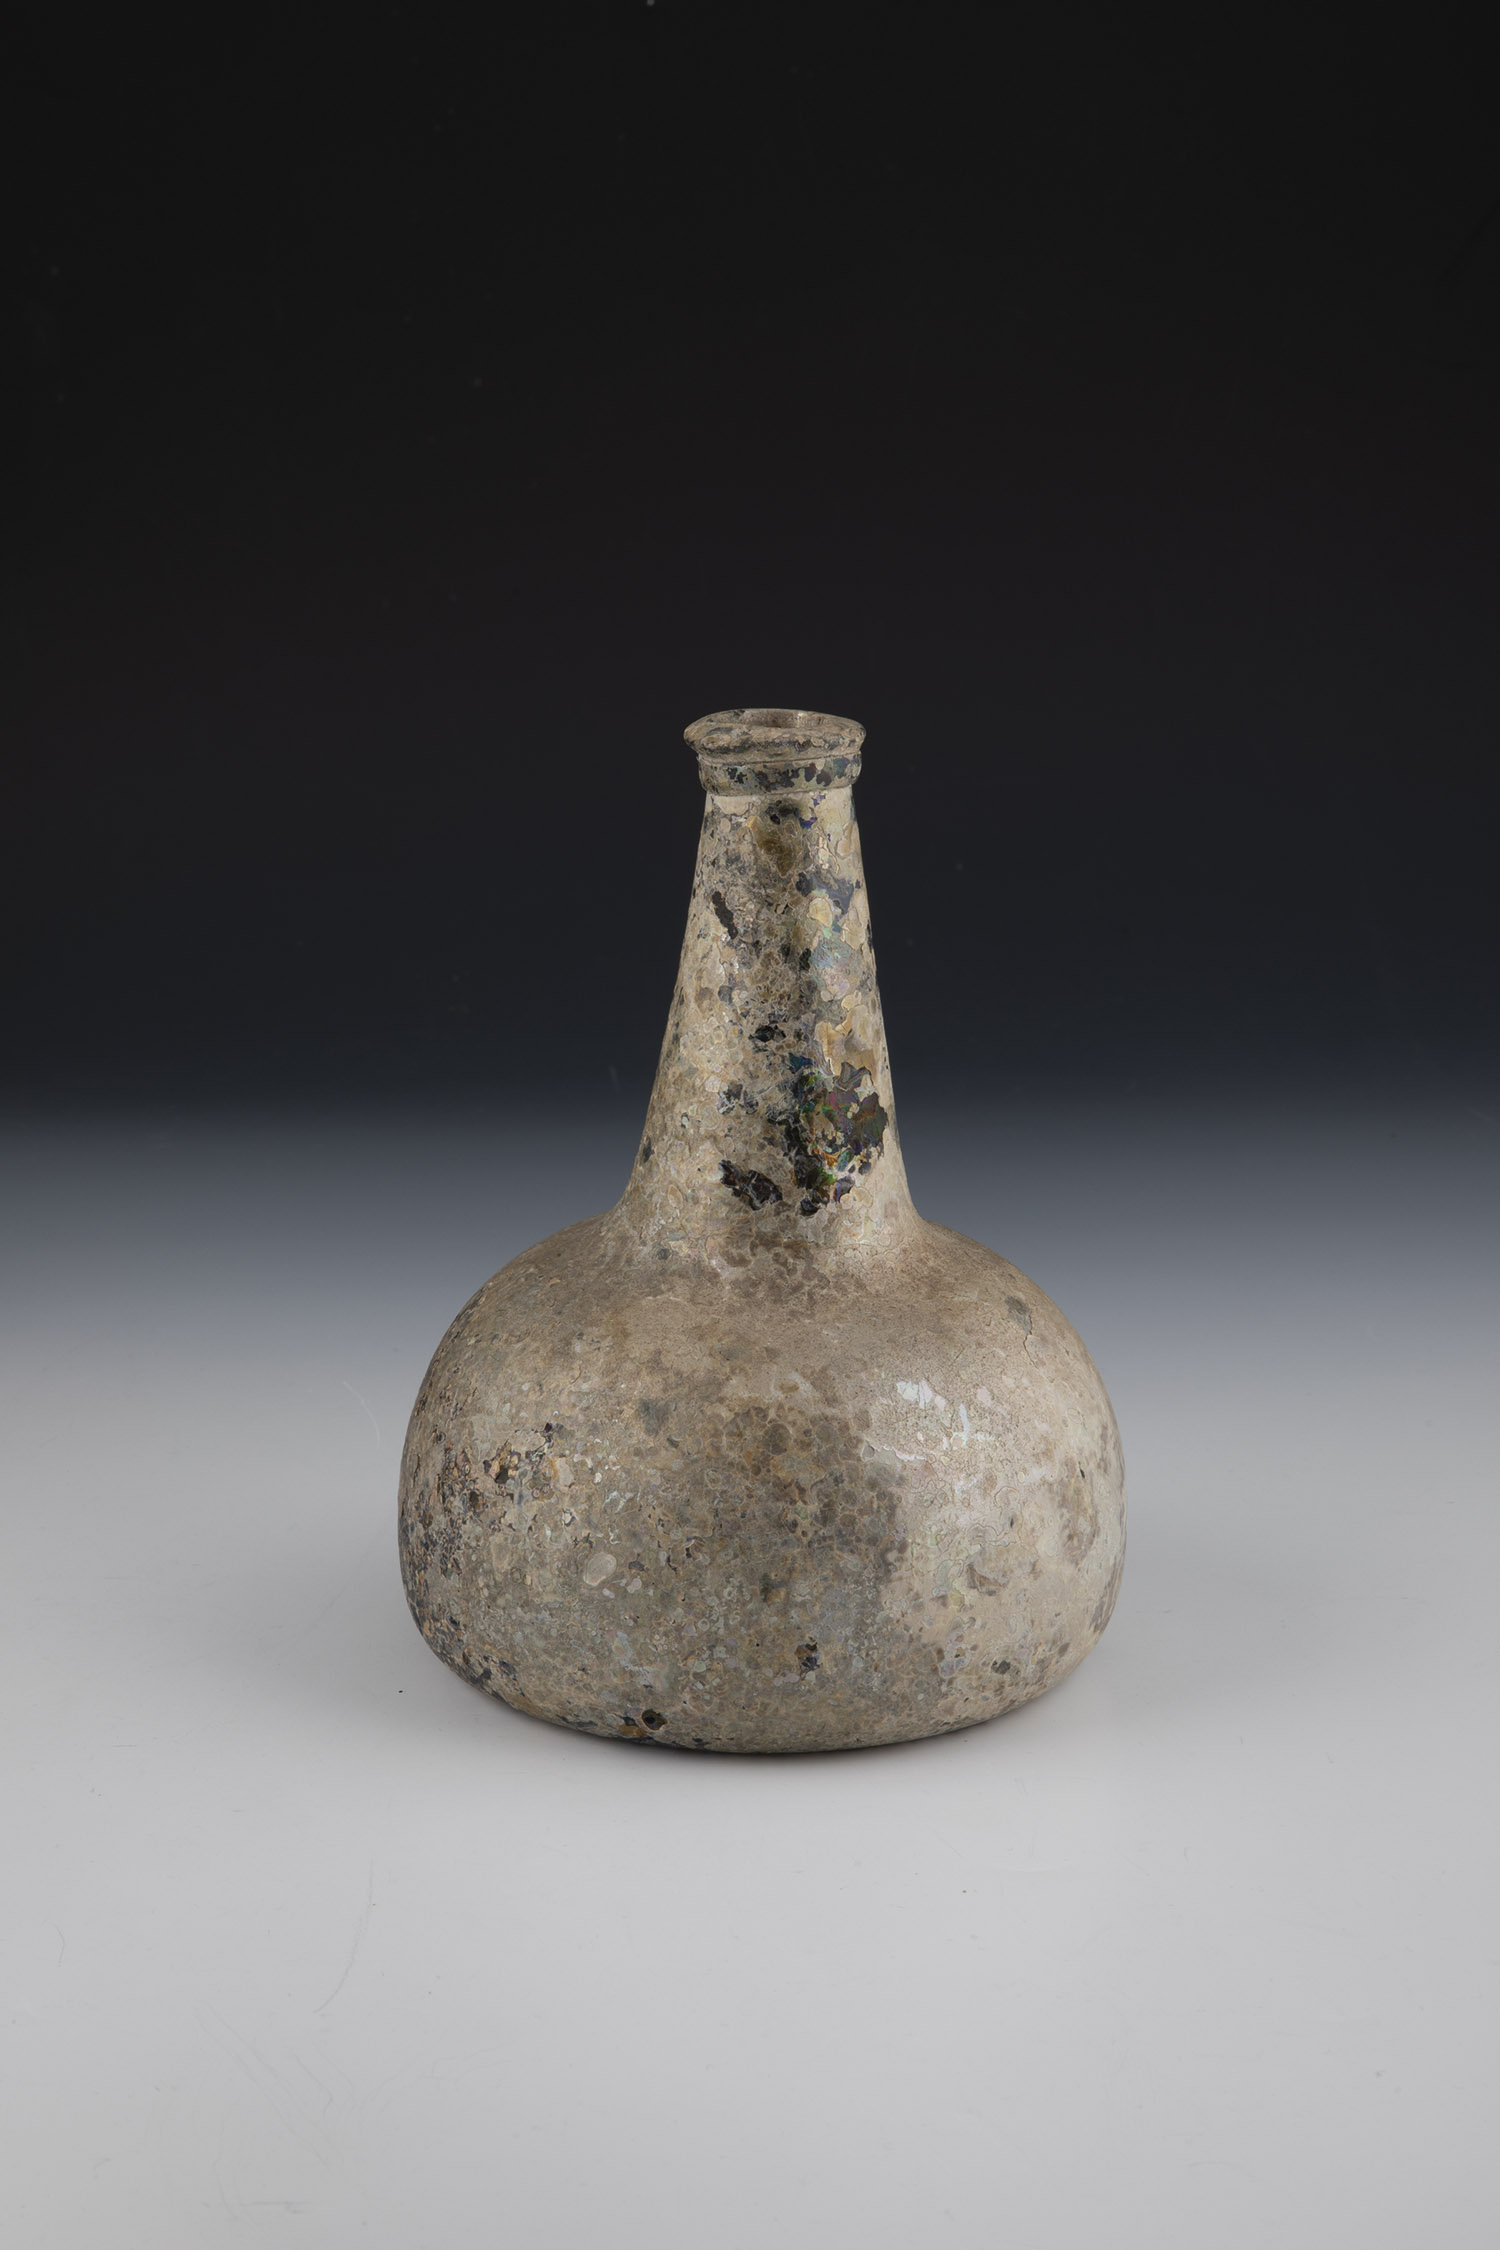 Spherical bottle Netherlands or Northern Germany, 18th century so-called onion. Soil or water